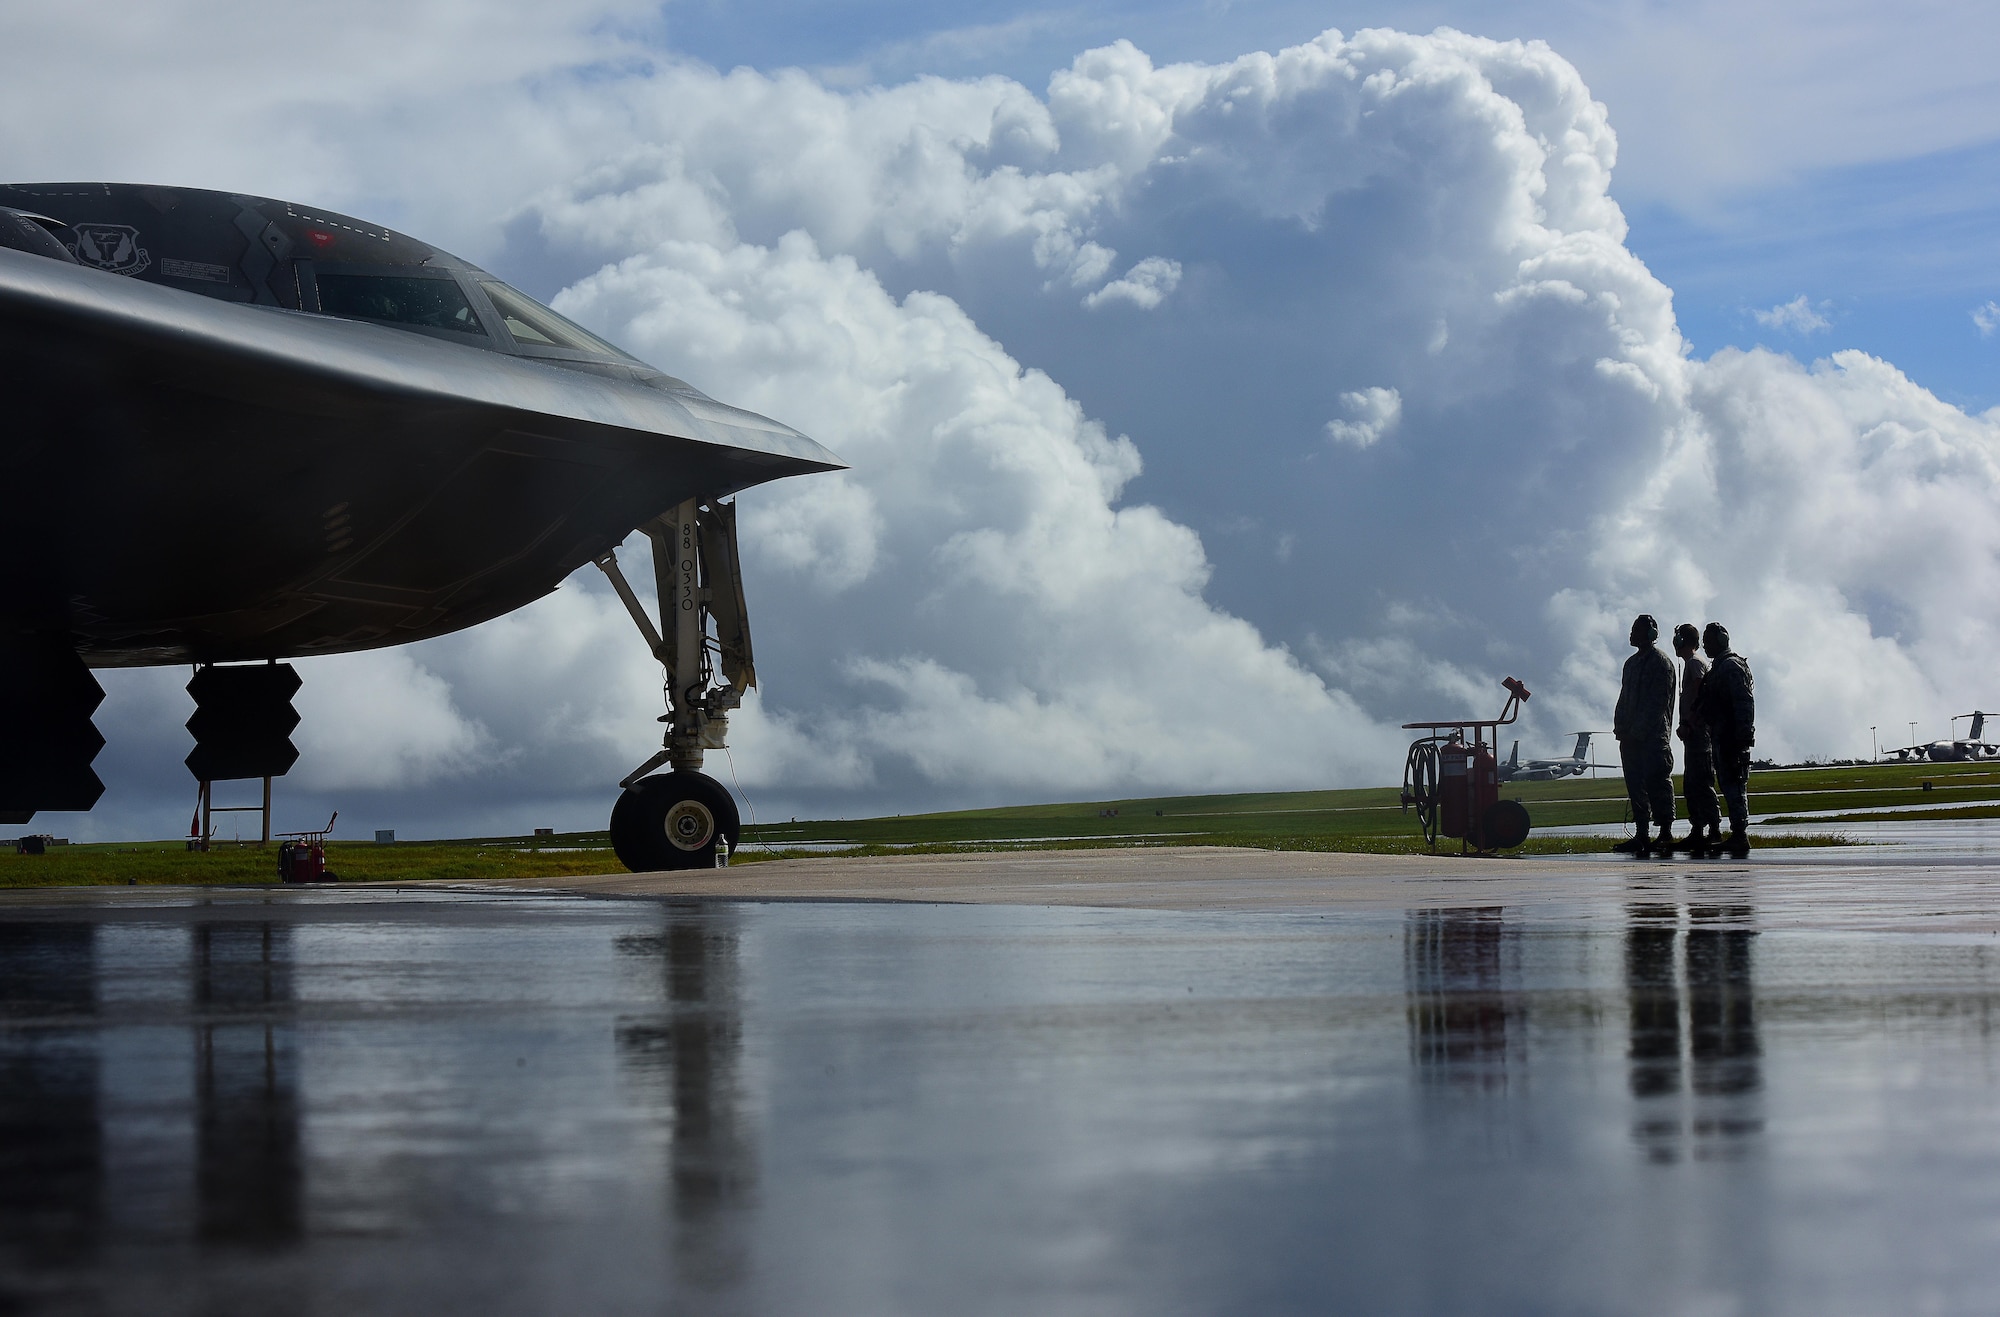 U.S. Air Force Airmen assigned to the 509th Aircraft Maintenance Squadron communicate pre-flight instructions with a B-2 Spirit pilot prior to takeoff at Andersen Air Force Base, Guam, Jan. 12, 2017. Bomber missions enable crews to maintain a high state of readiness and proficiency, and validate our always-ready global strike capability. (U.S. Air Force photo by Airman 1st Class Jazmin Smith)